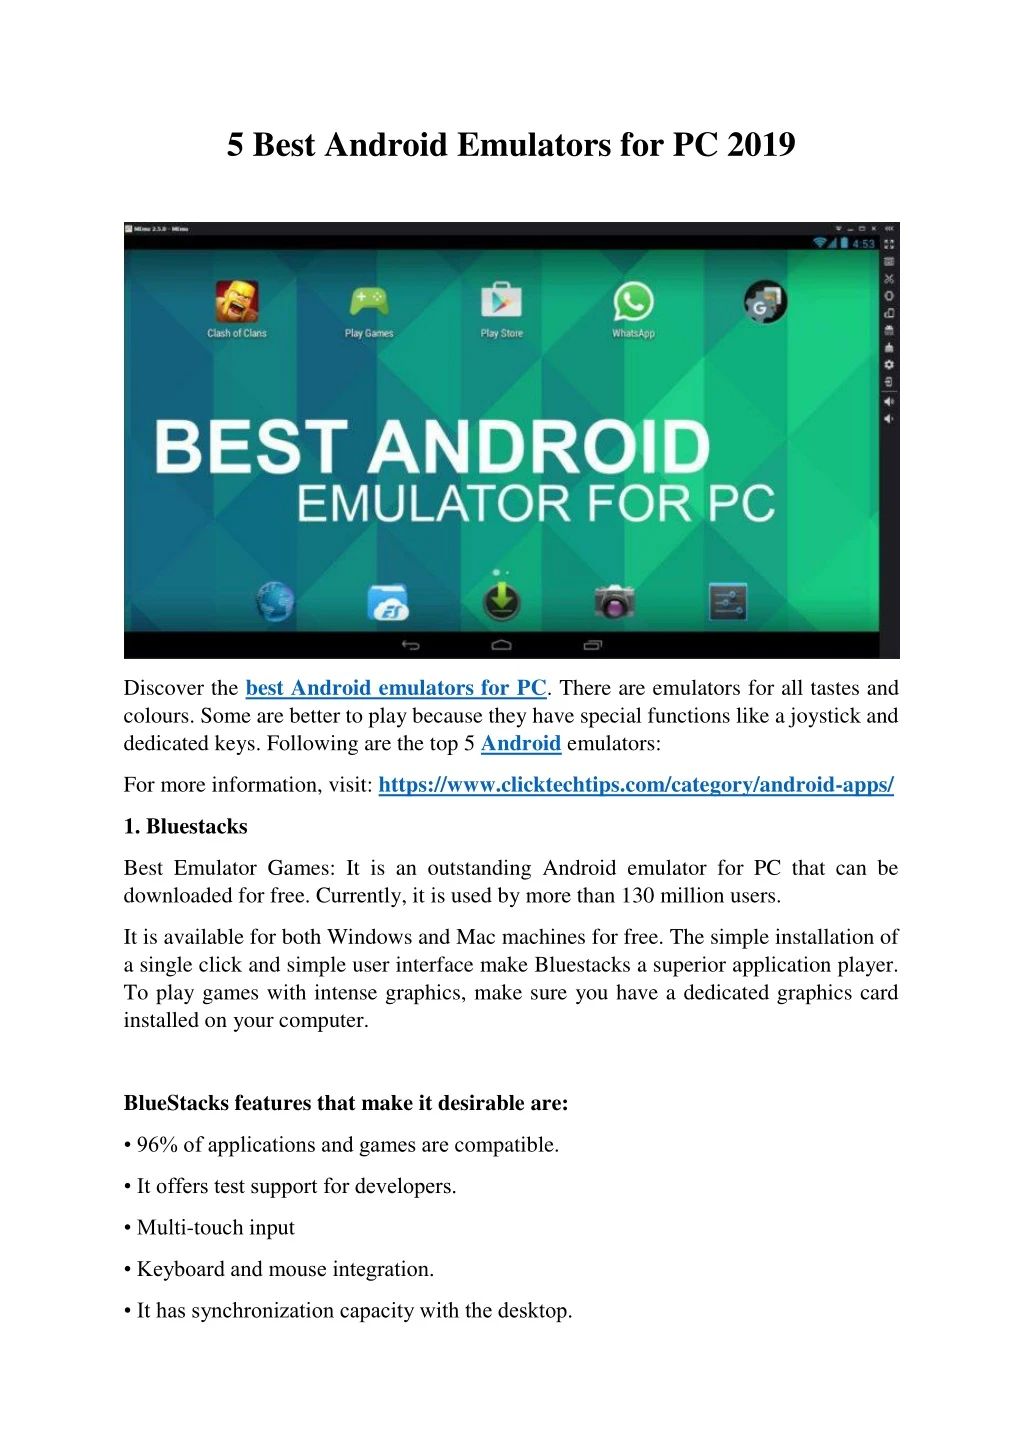 5 best android emulators for pc 2019